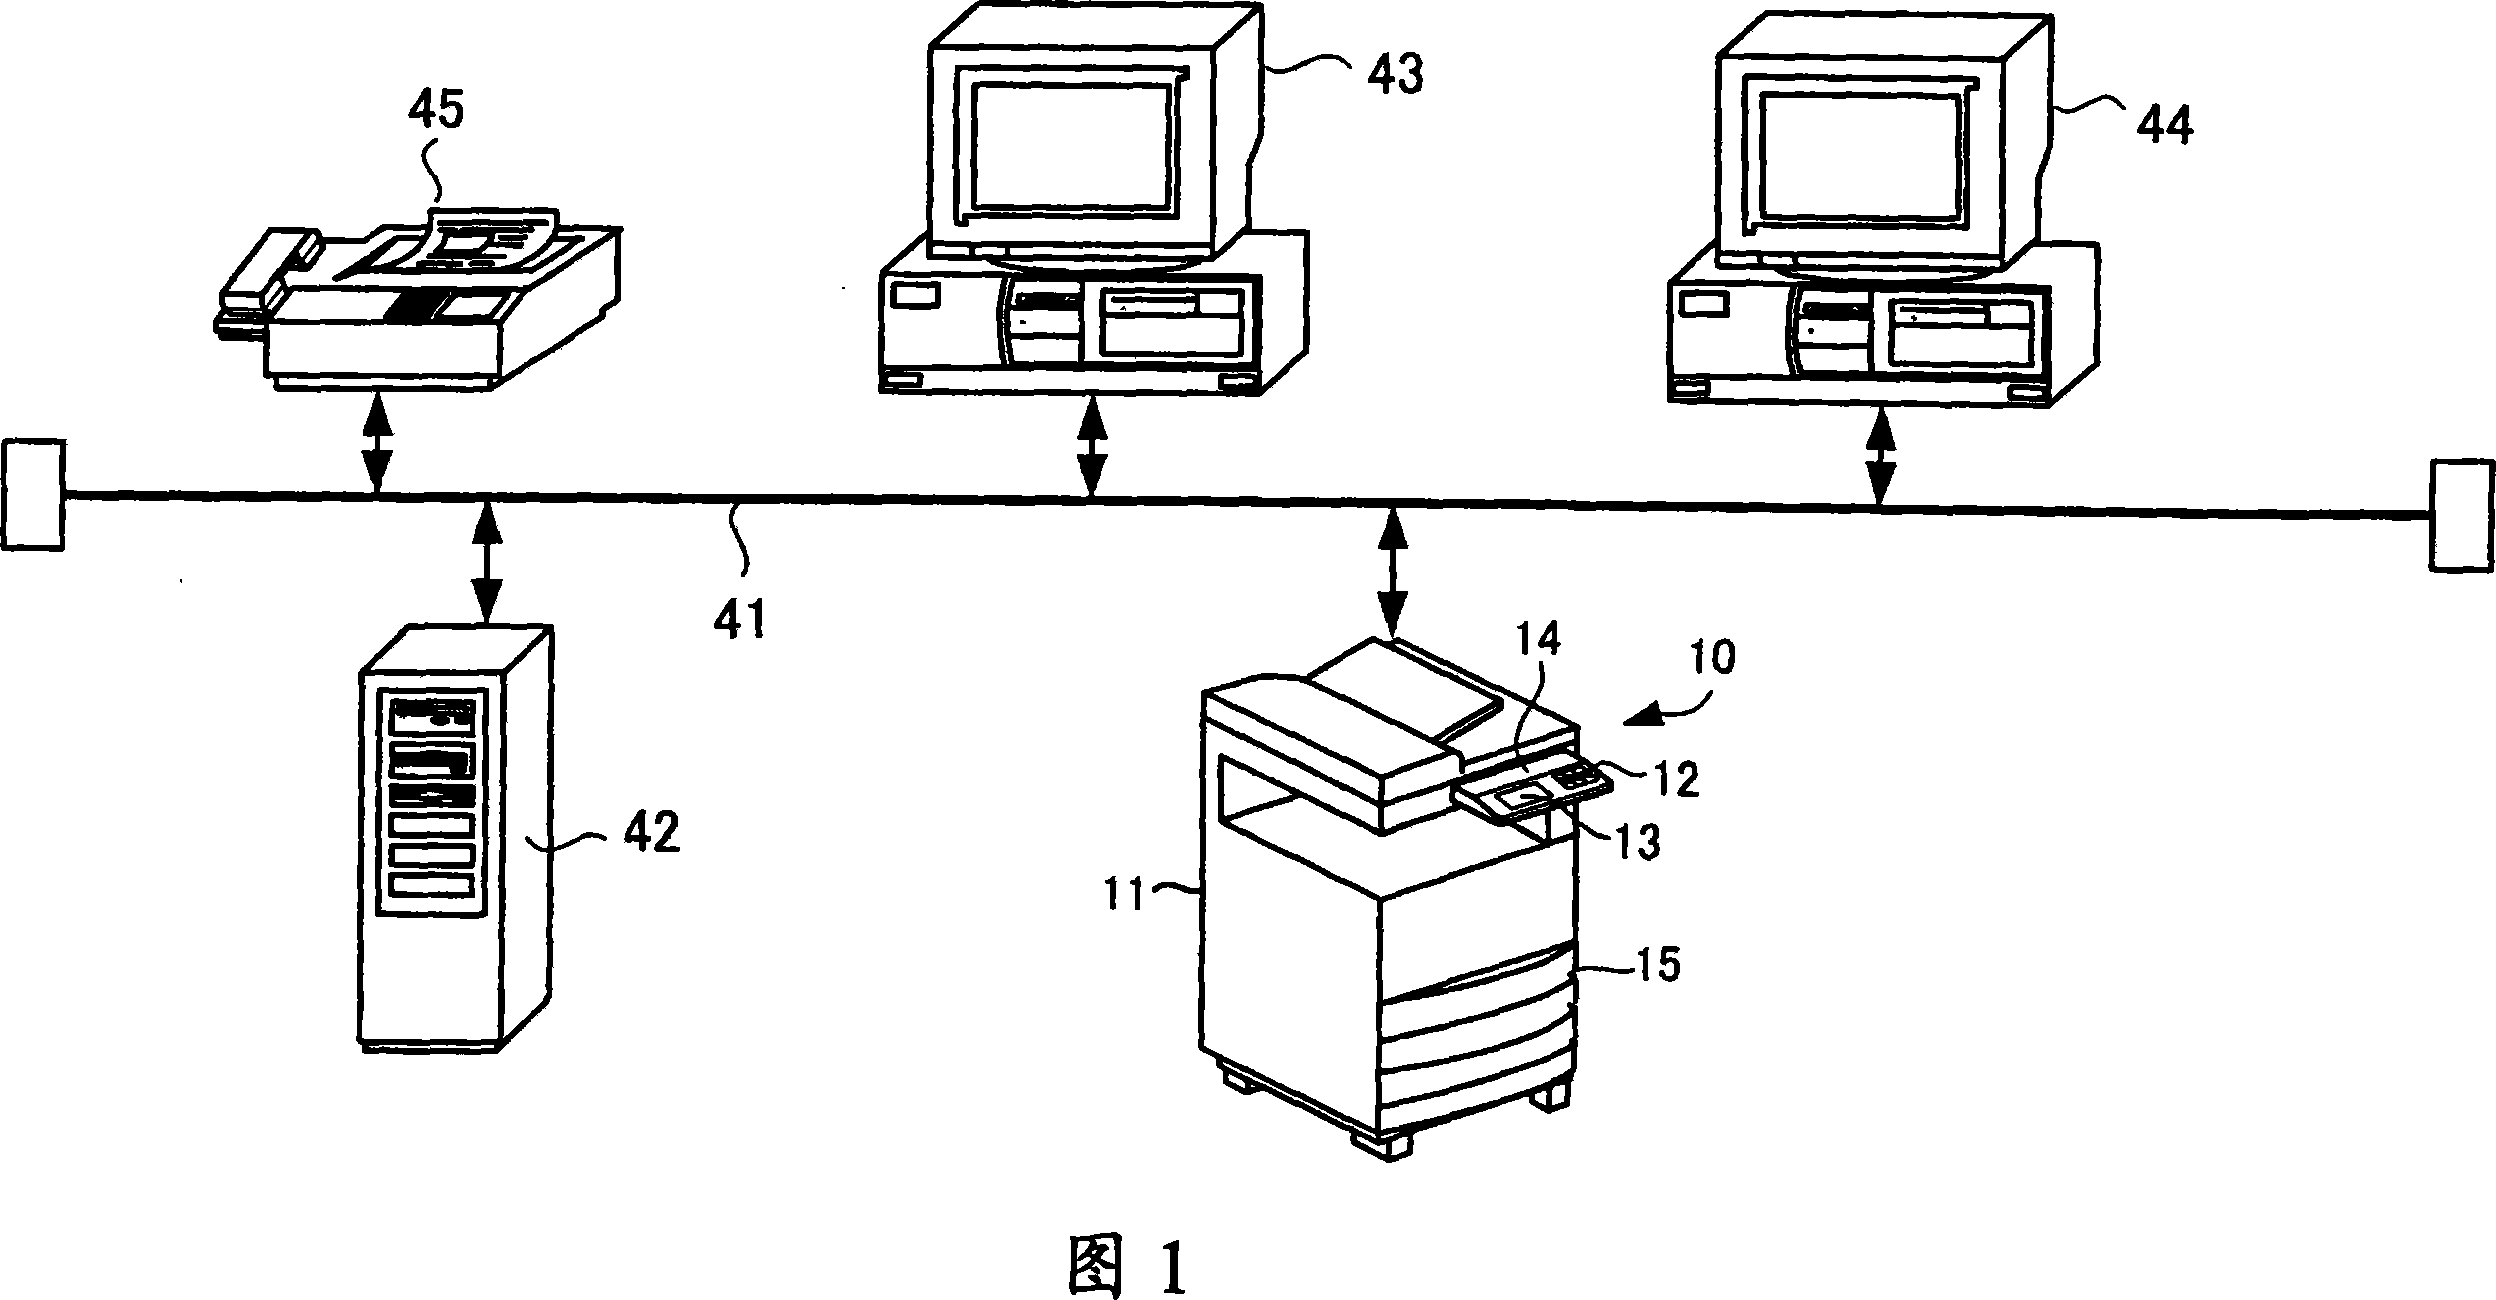 Image forming apparatus and document management system